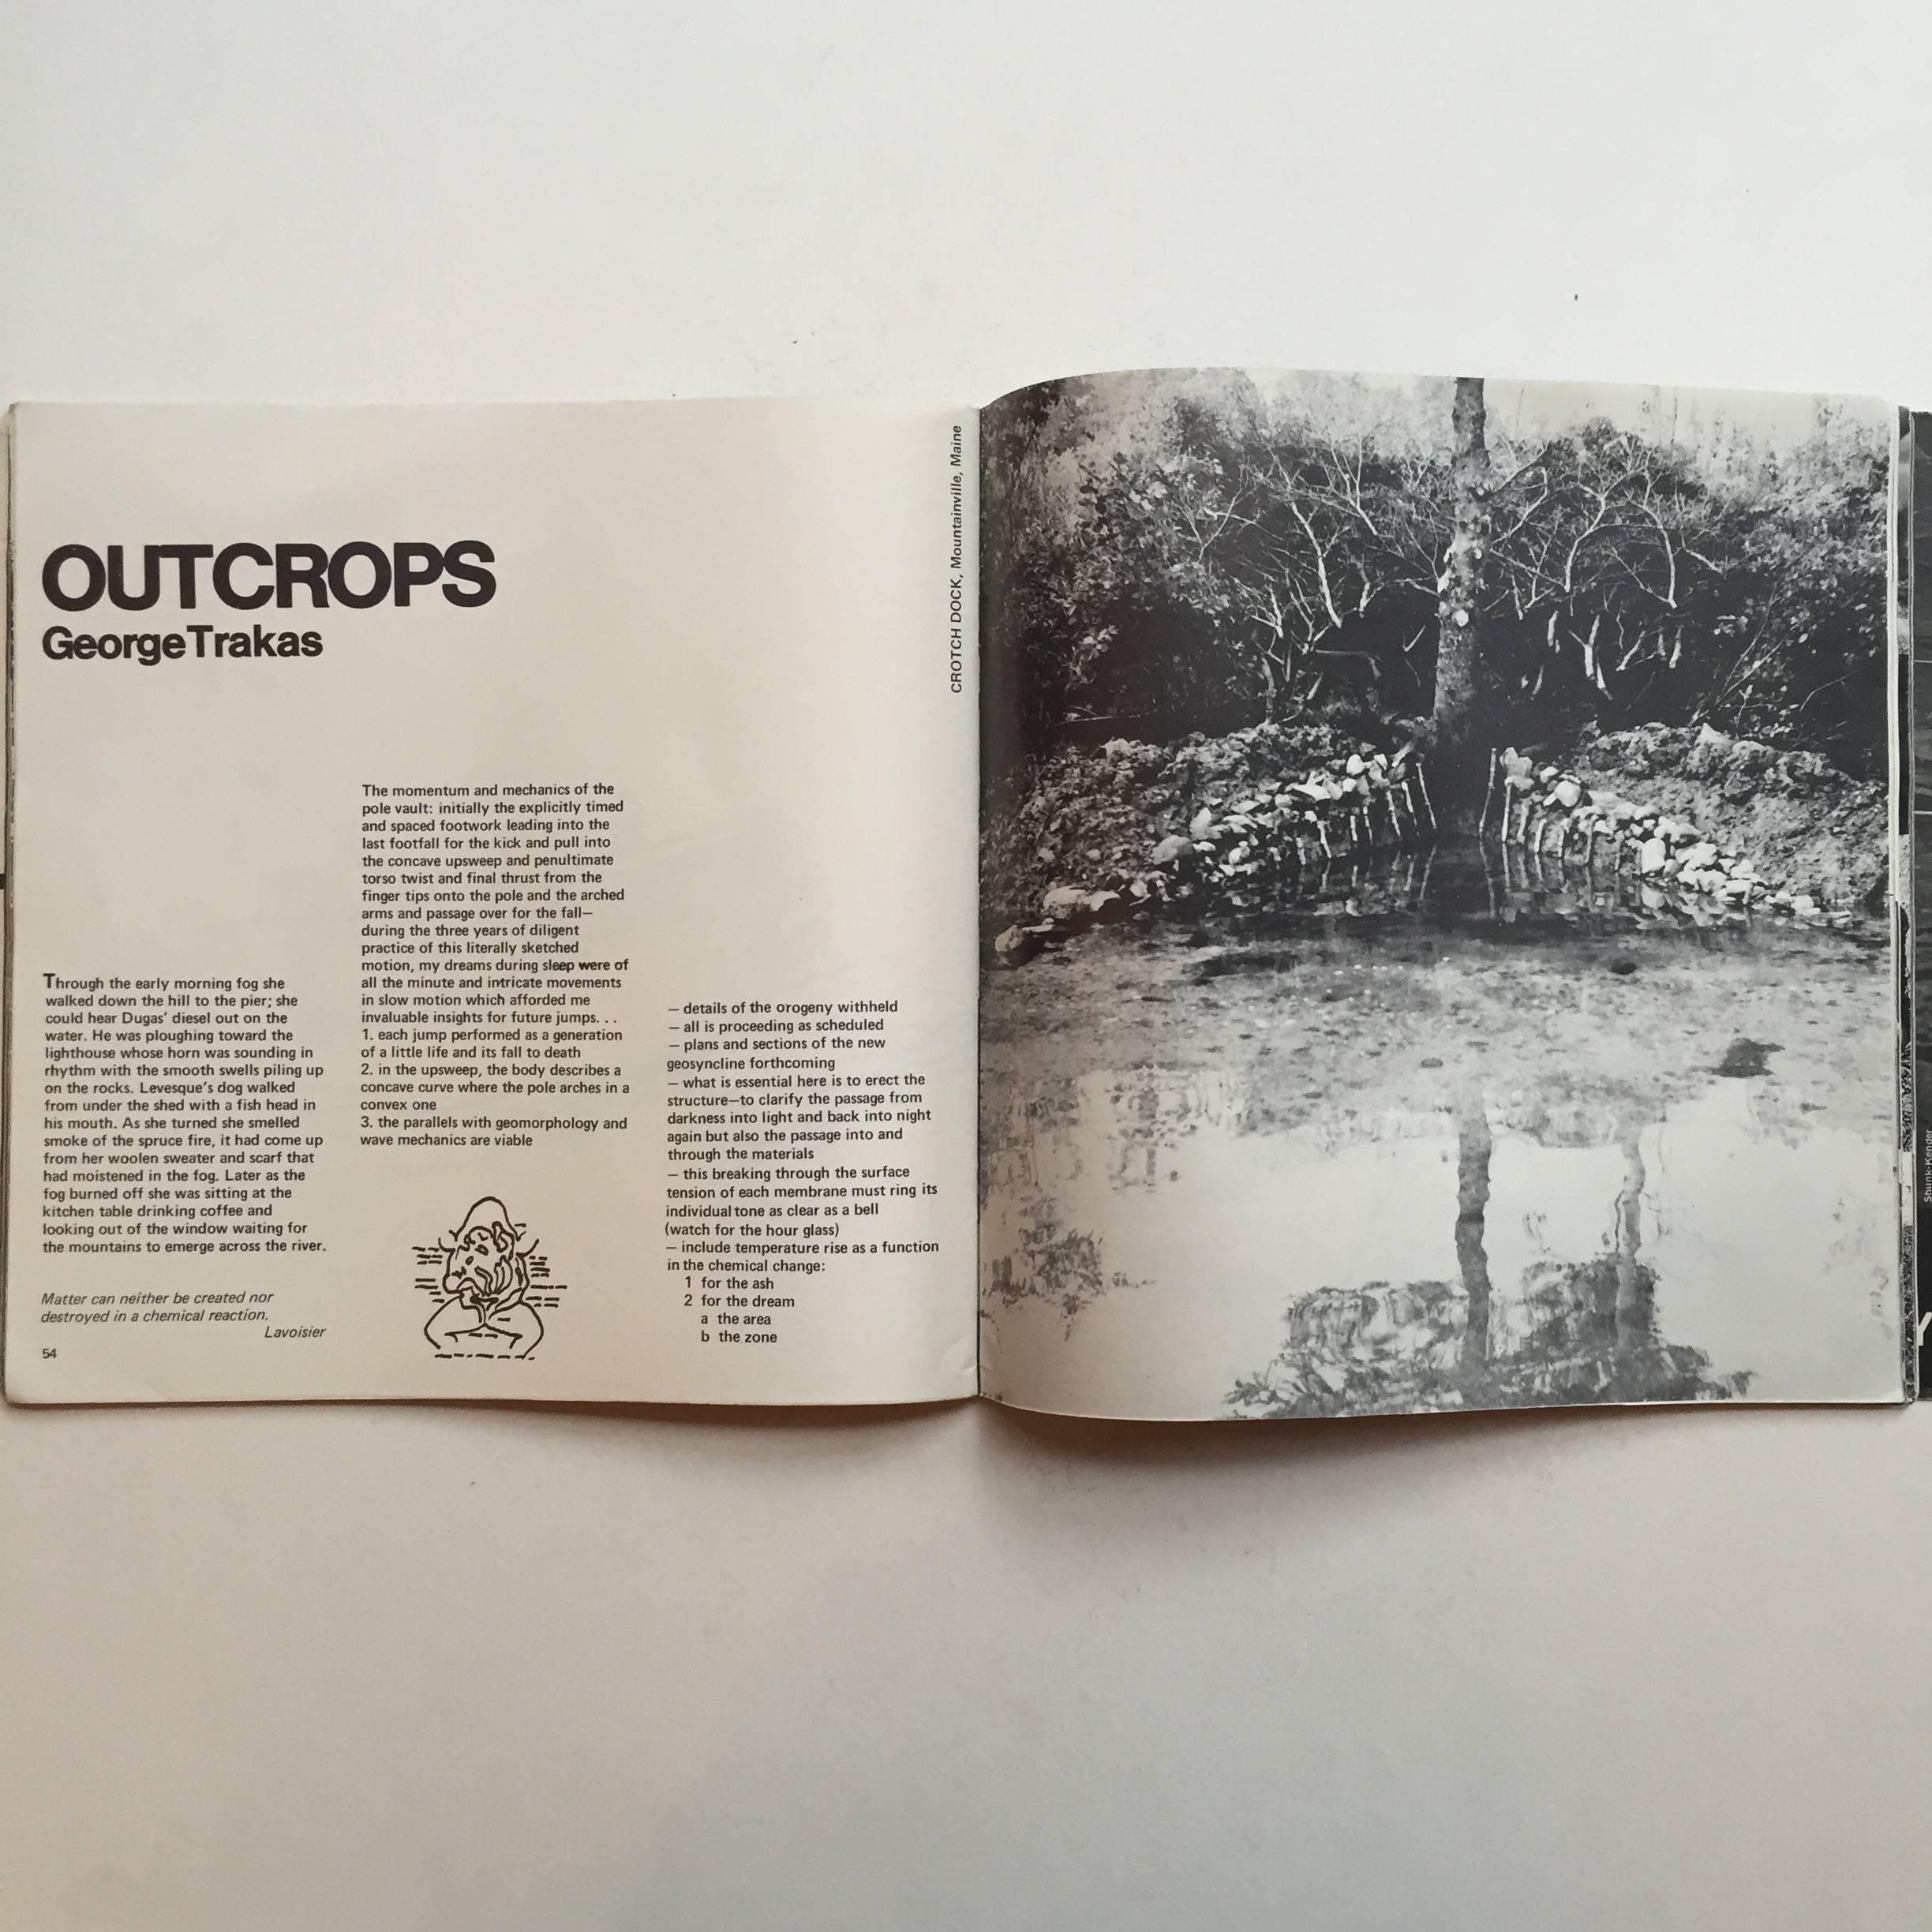 Published by Kineticism Press, New York, 1971

‘Avalanche’ was an important artists’ journal published quarterly throughout the first half of the 1970s, closely associated with post-Minimalist, post-studio conceptual artists in the United States